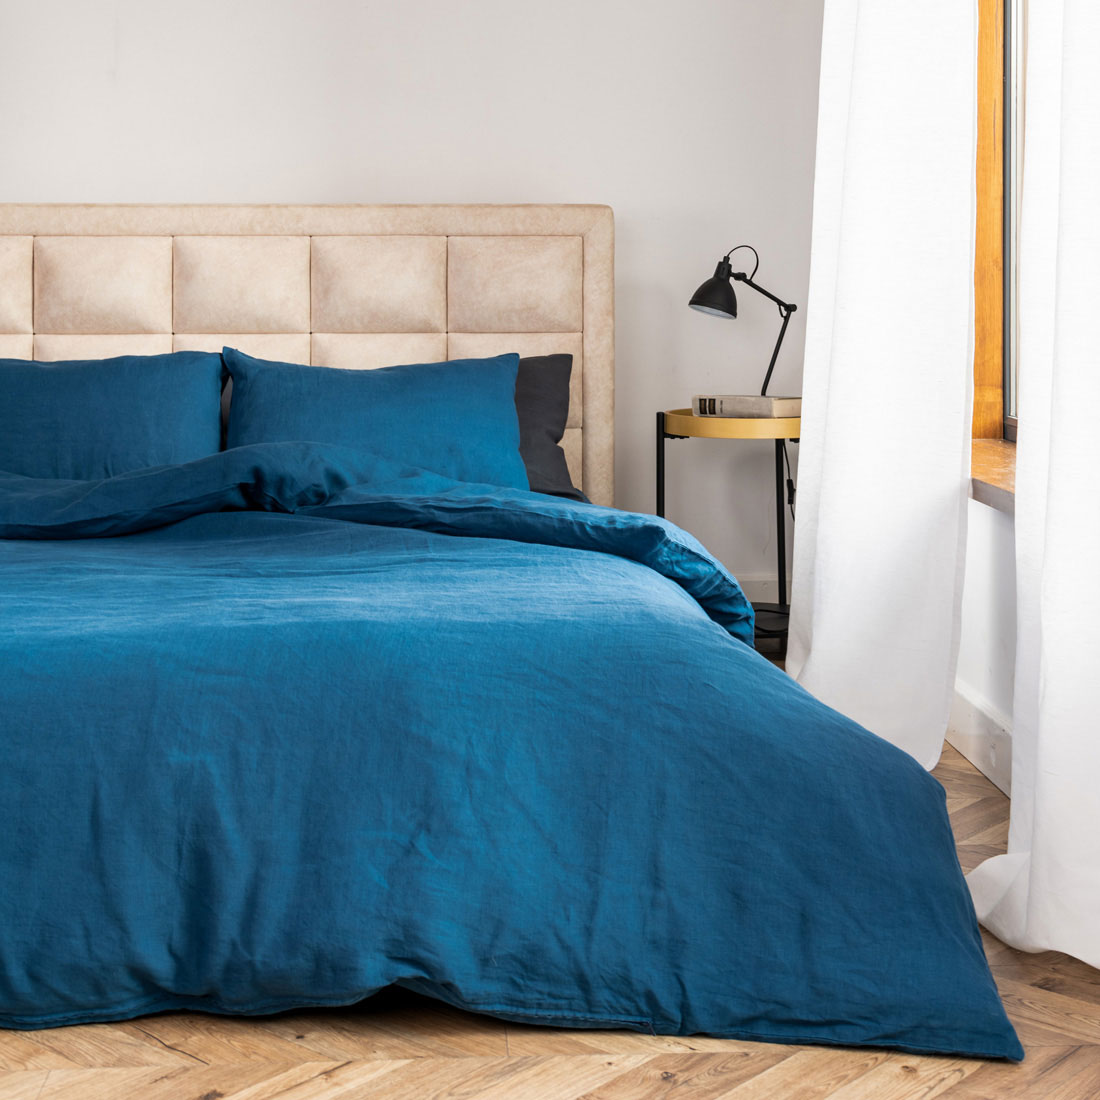 bed linen photography